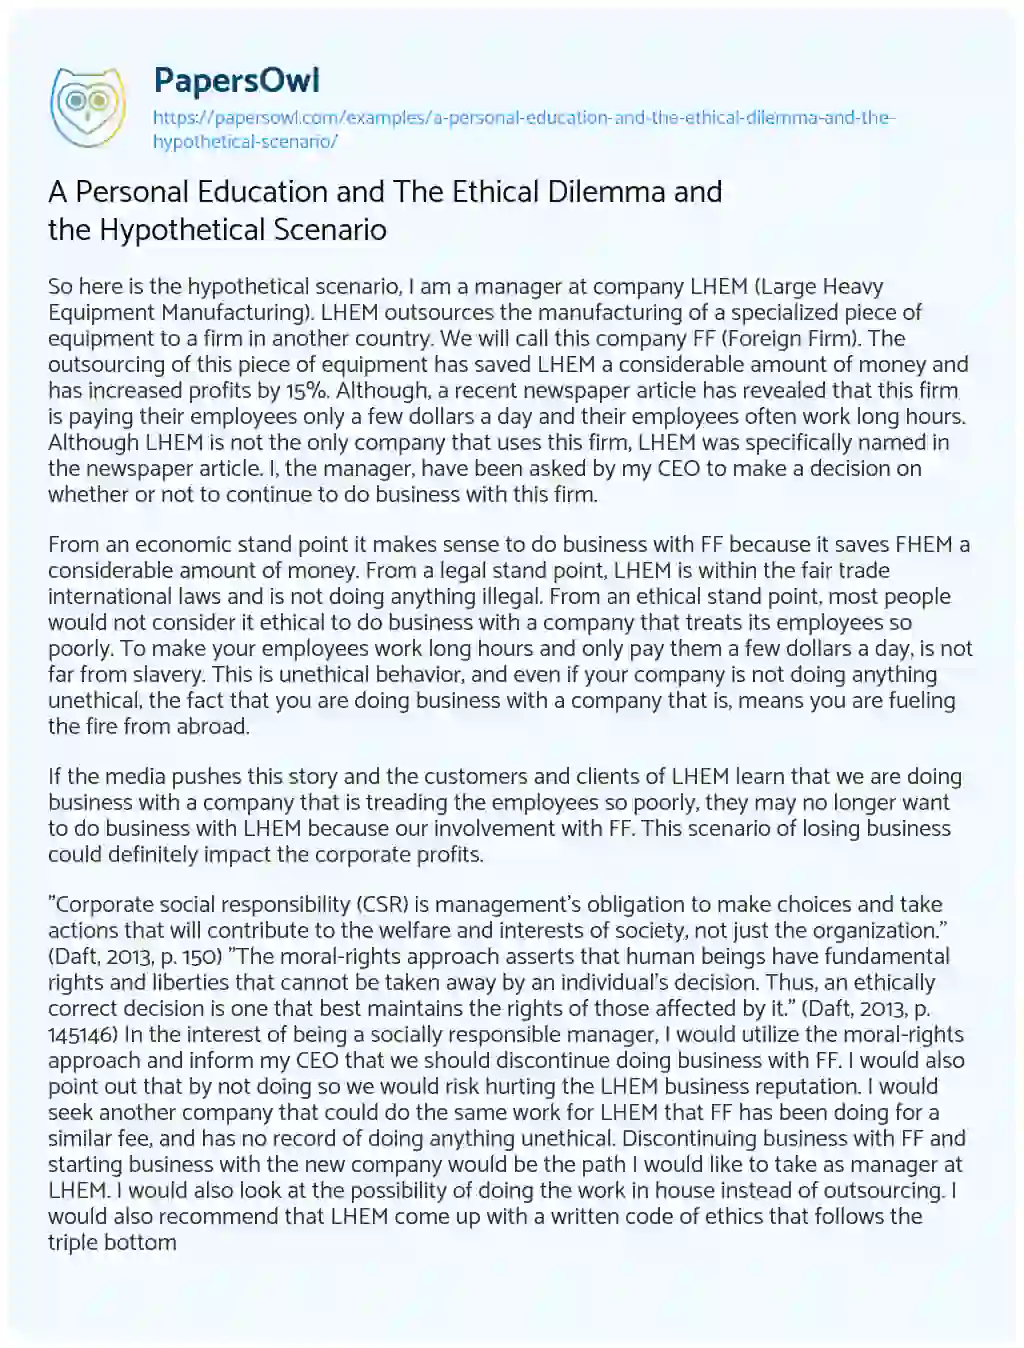 A Personal Education and the Ethical Dilemma and the Hypothetical Scenario essay